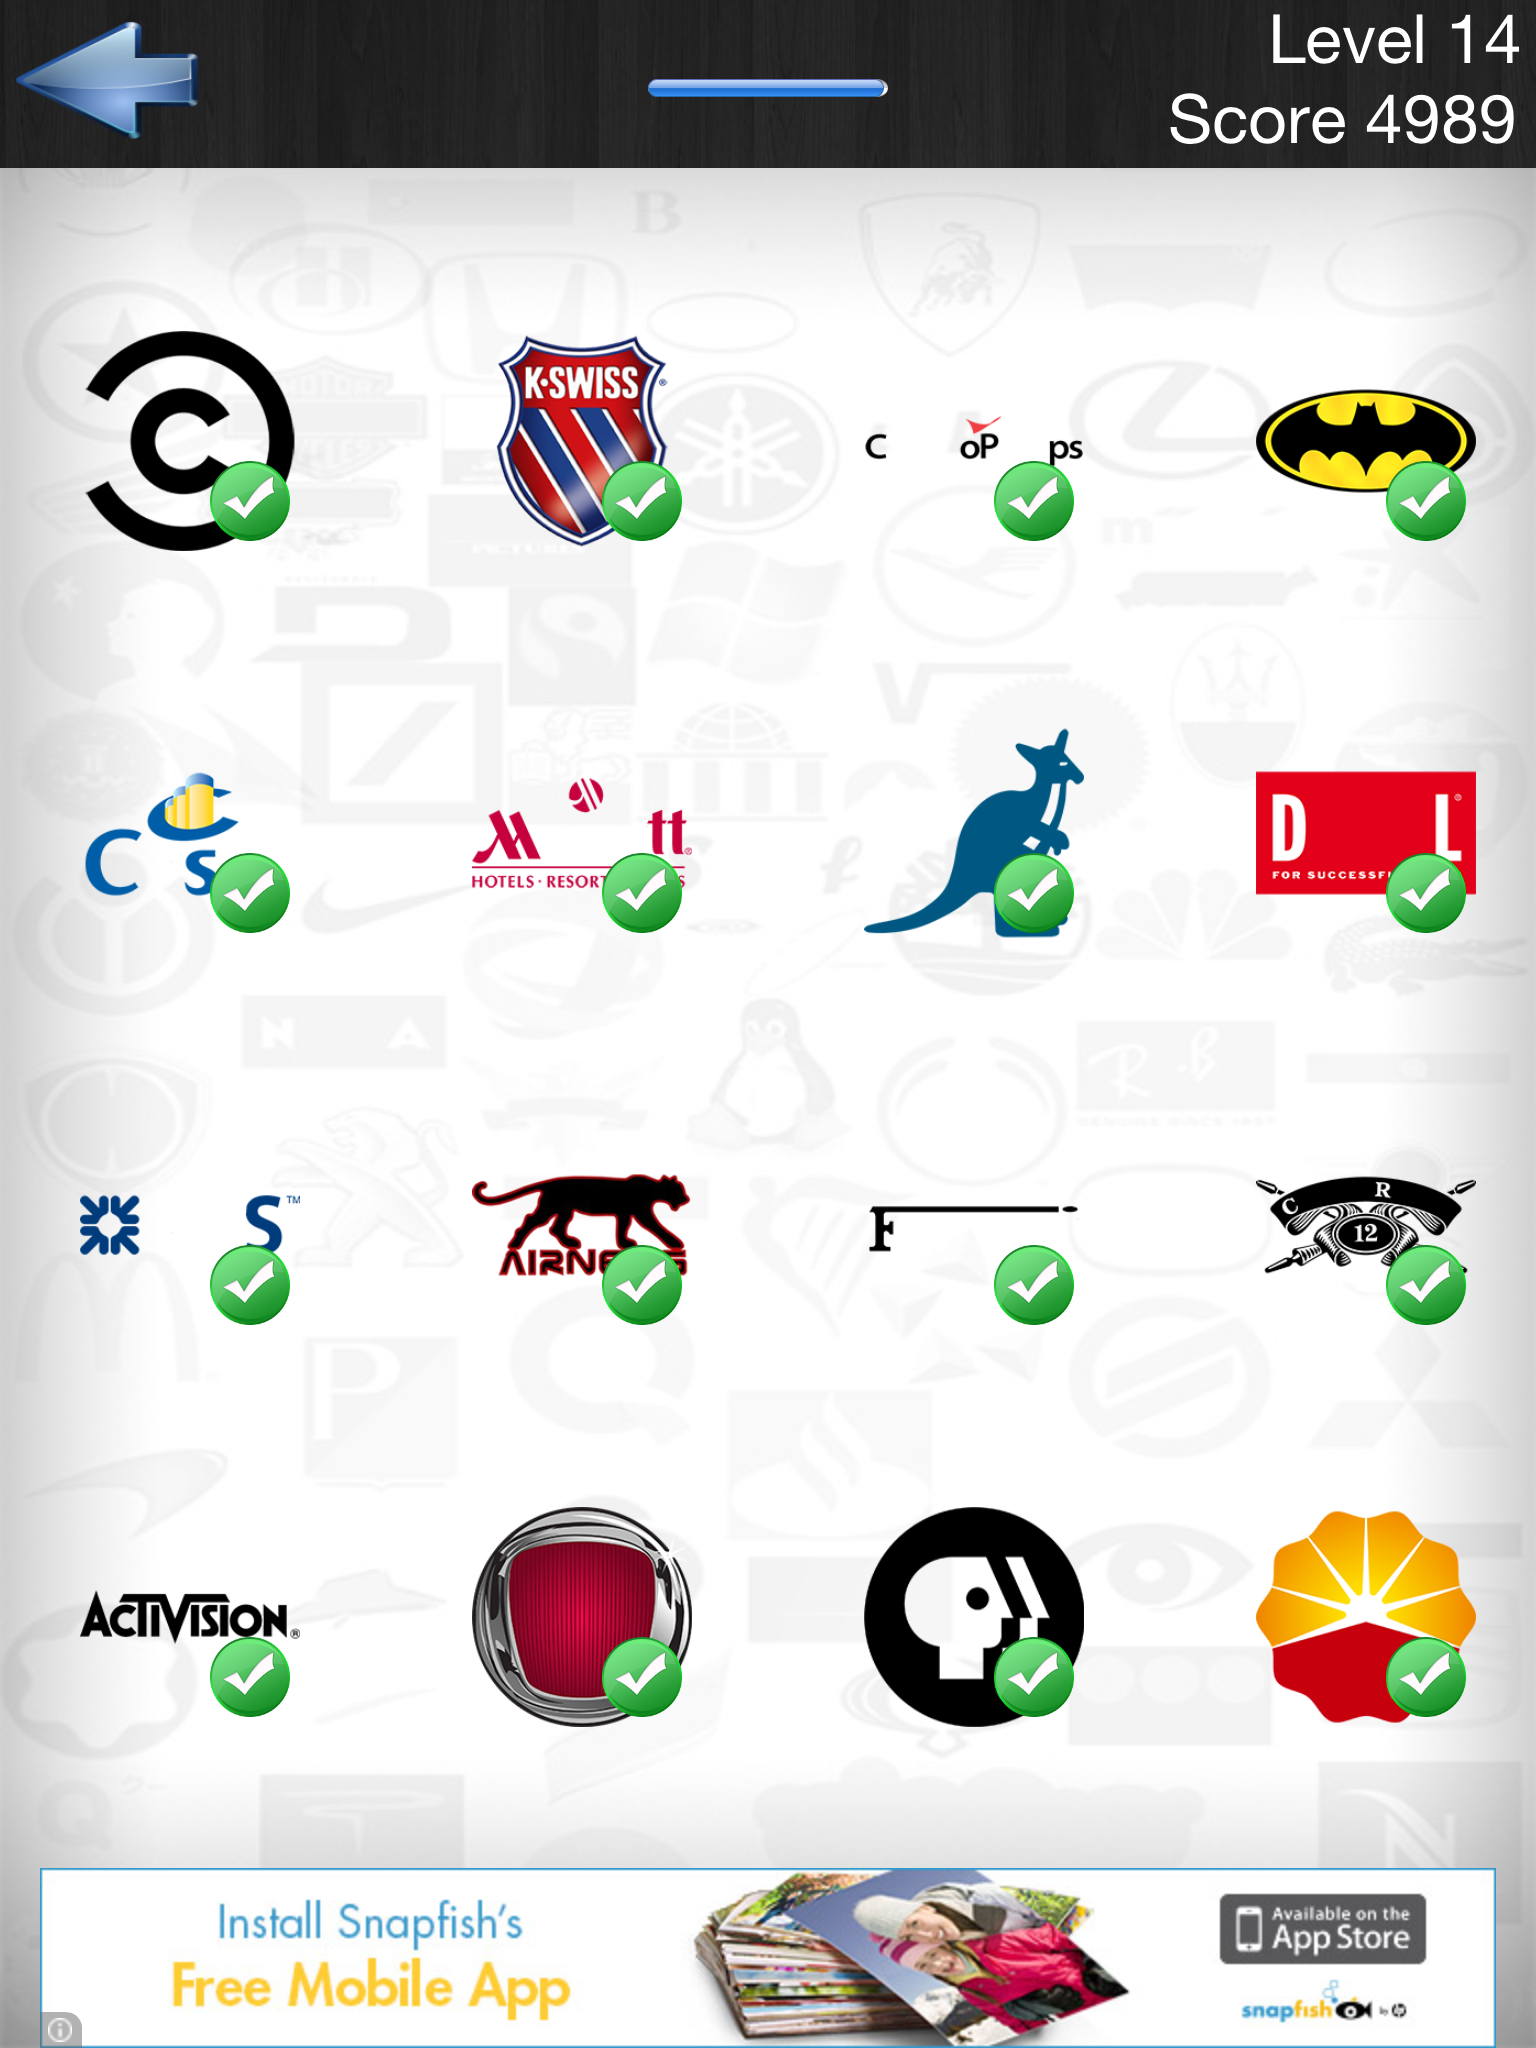 logo quiz answers level 12 android app